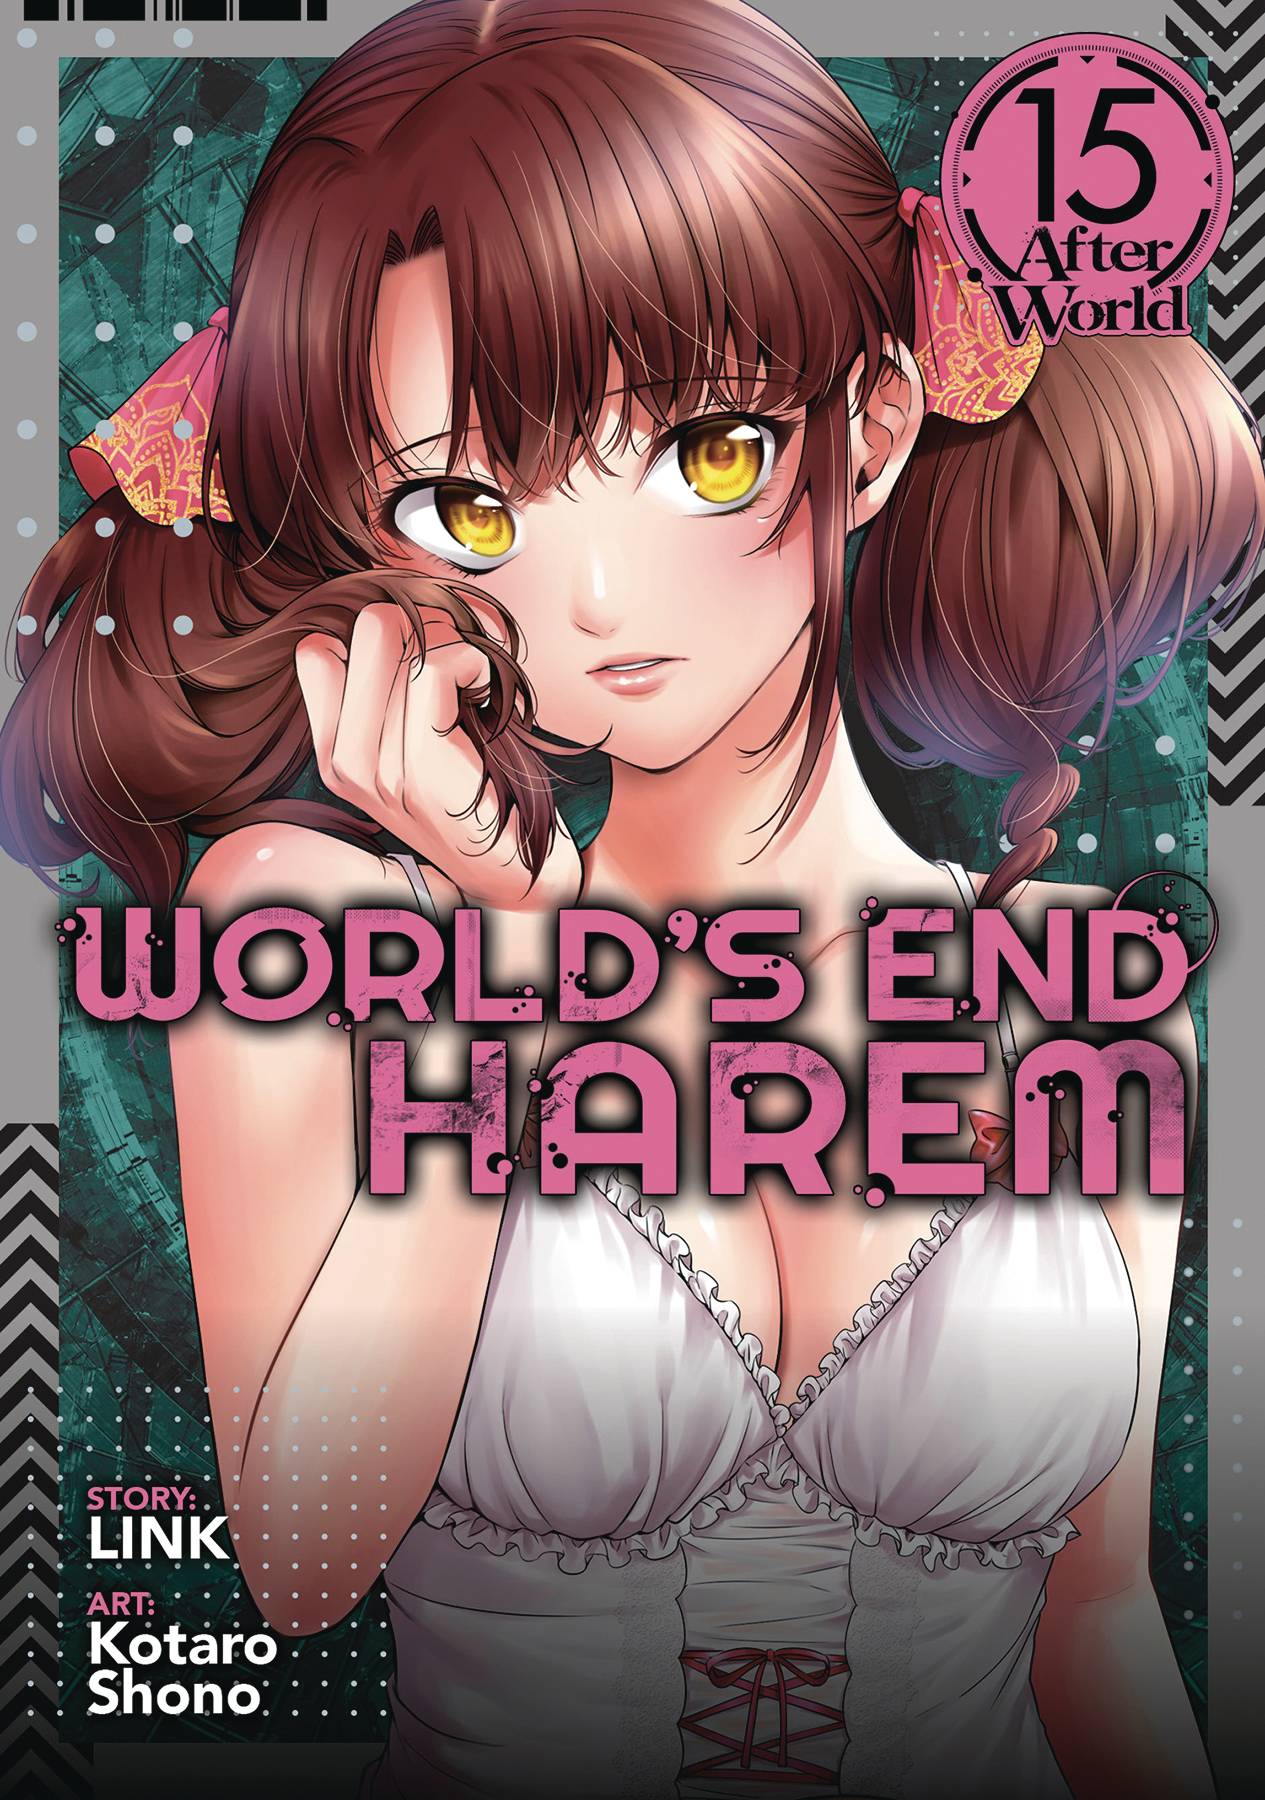 World's End Harem Episode 4 - Shouta Learns the Truth